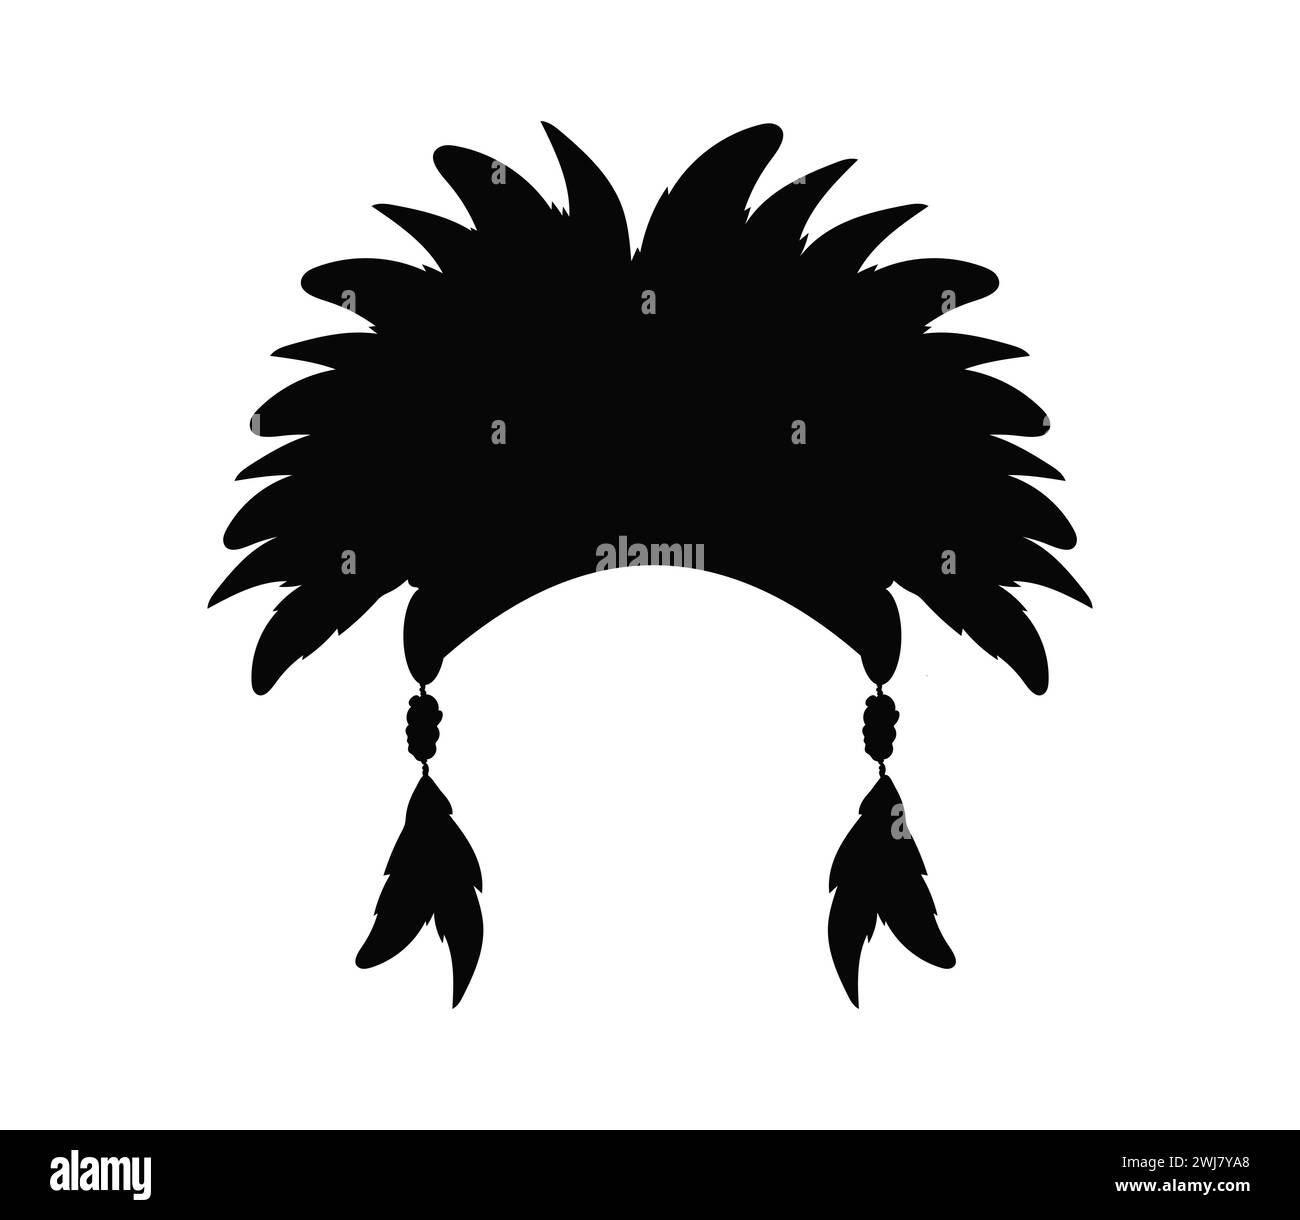 Indian headdress with feathers silhouette Stock Vector